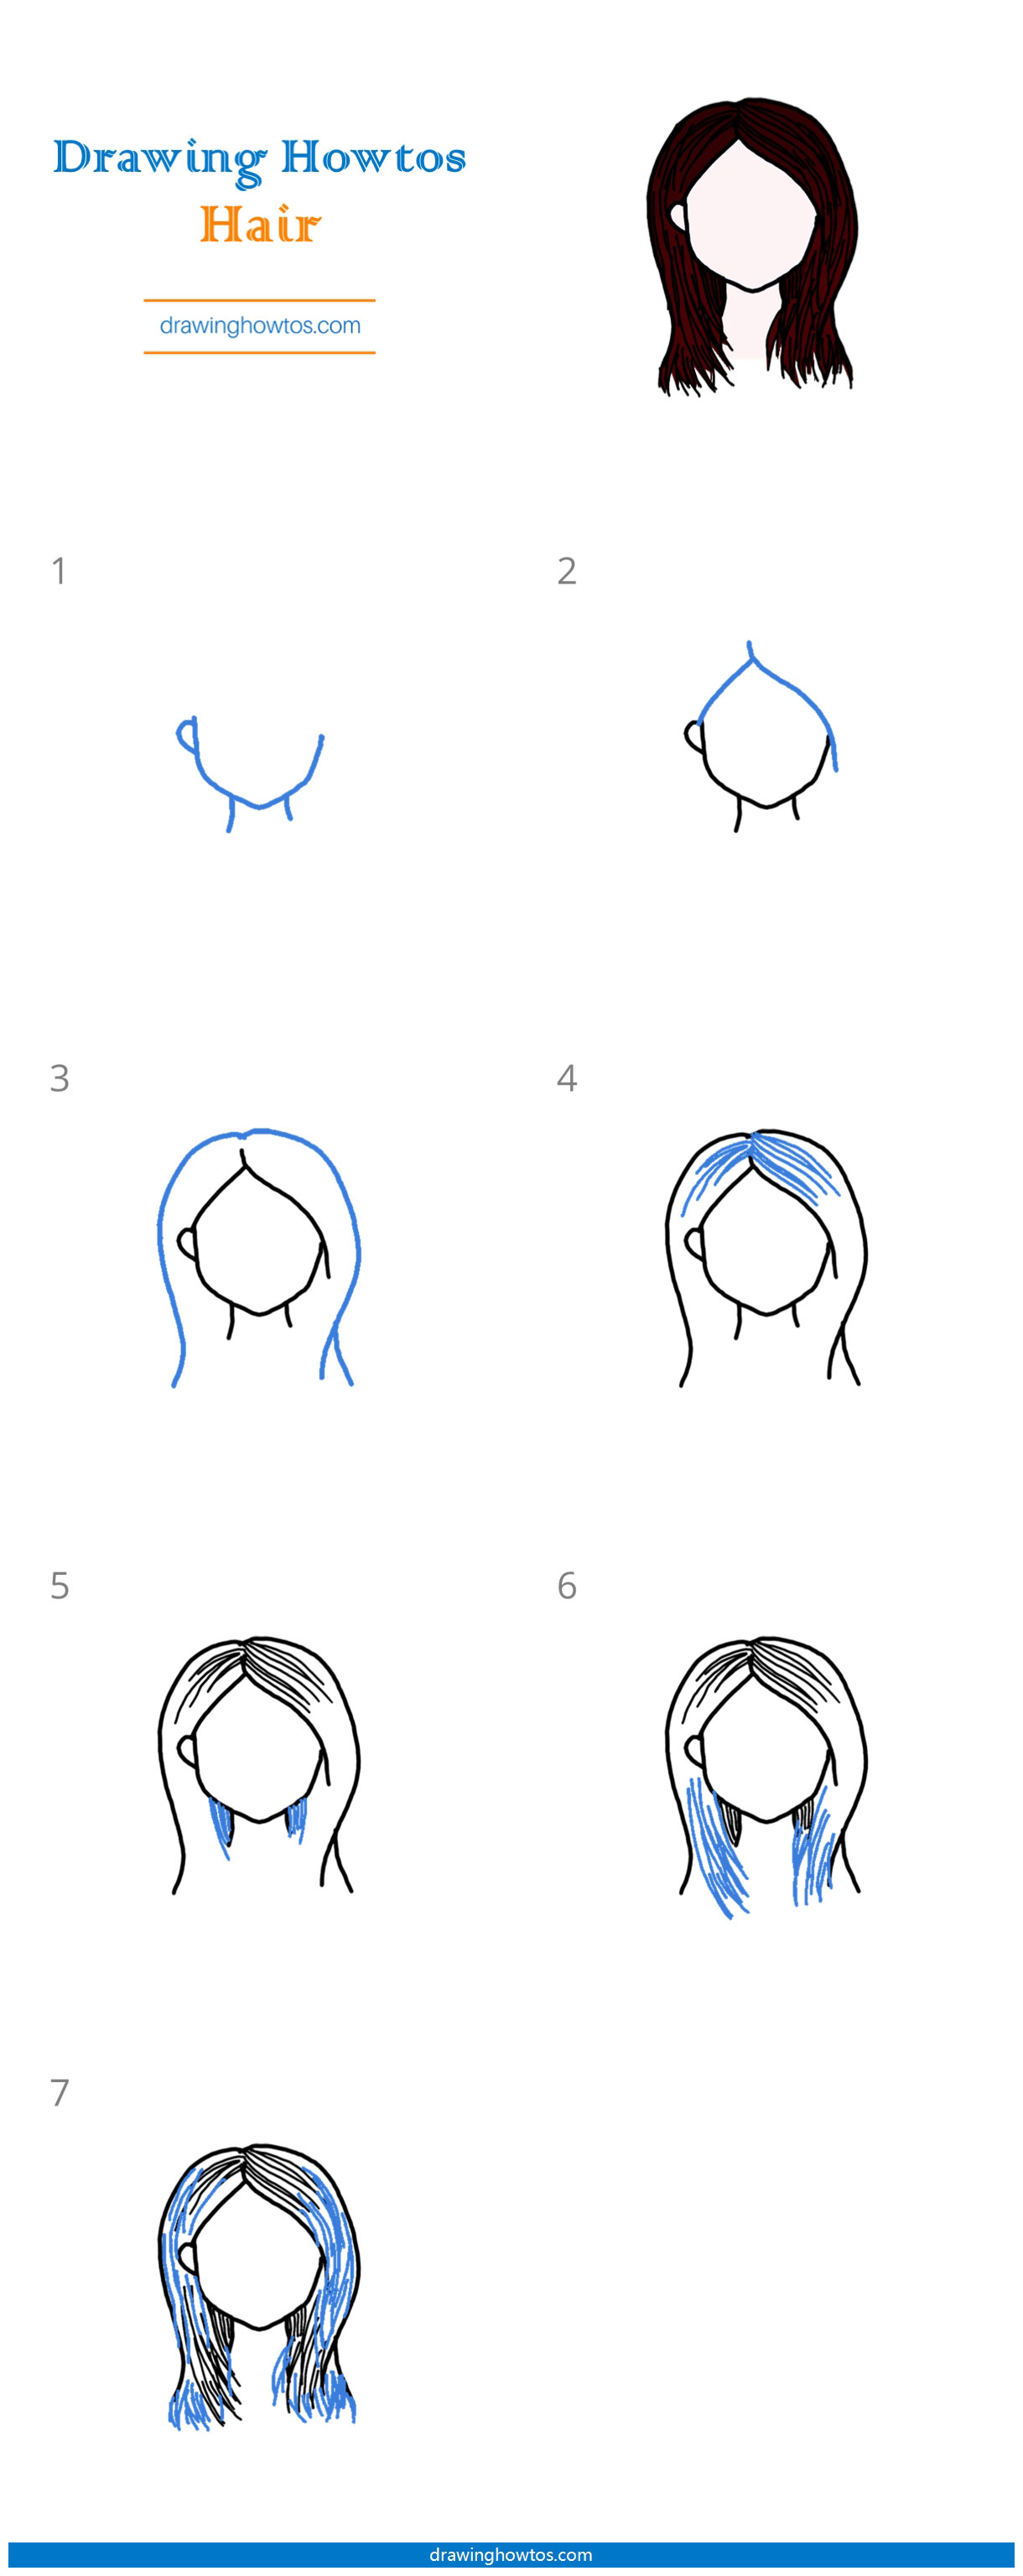 How to Draw Hair - Step by Step Easy Drawing Guides - Drawing Howtos